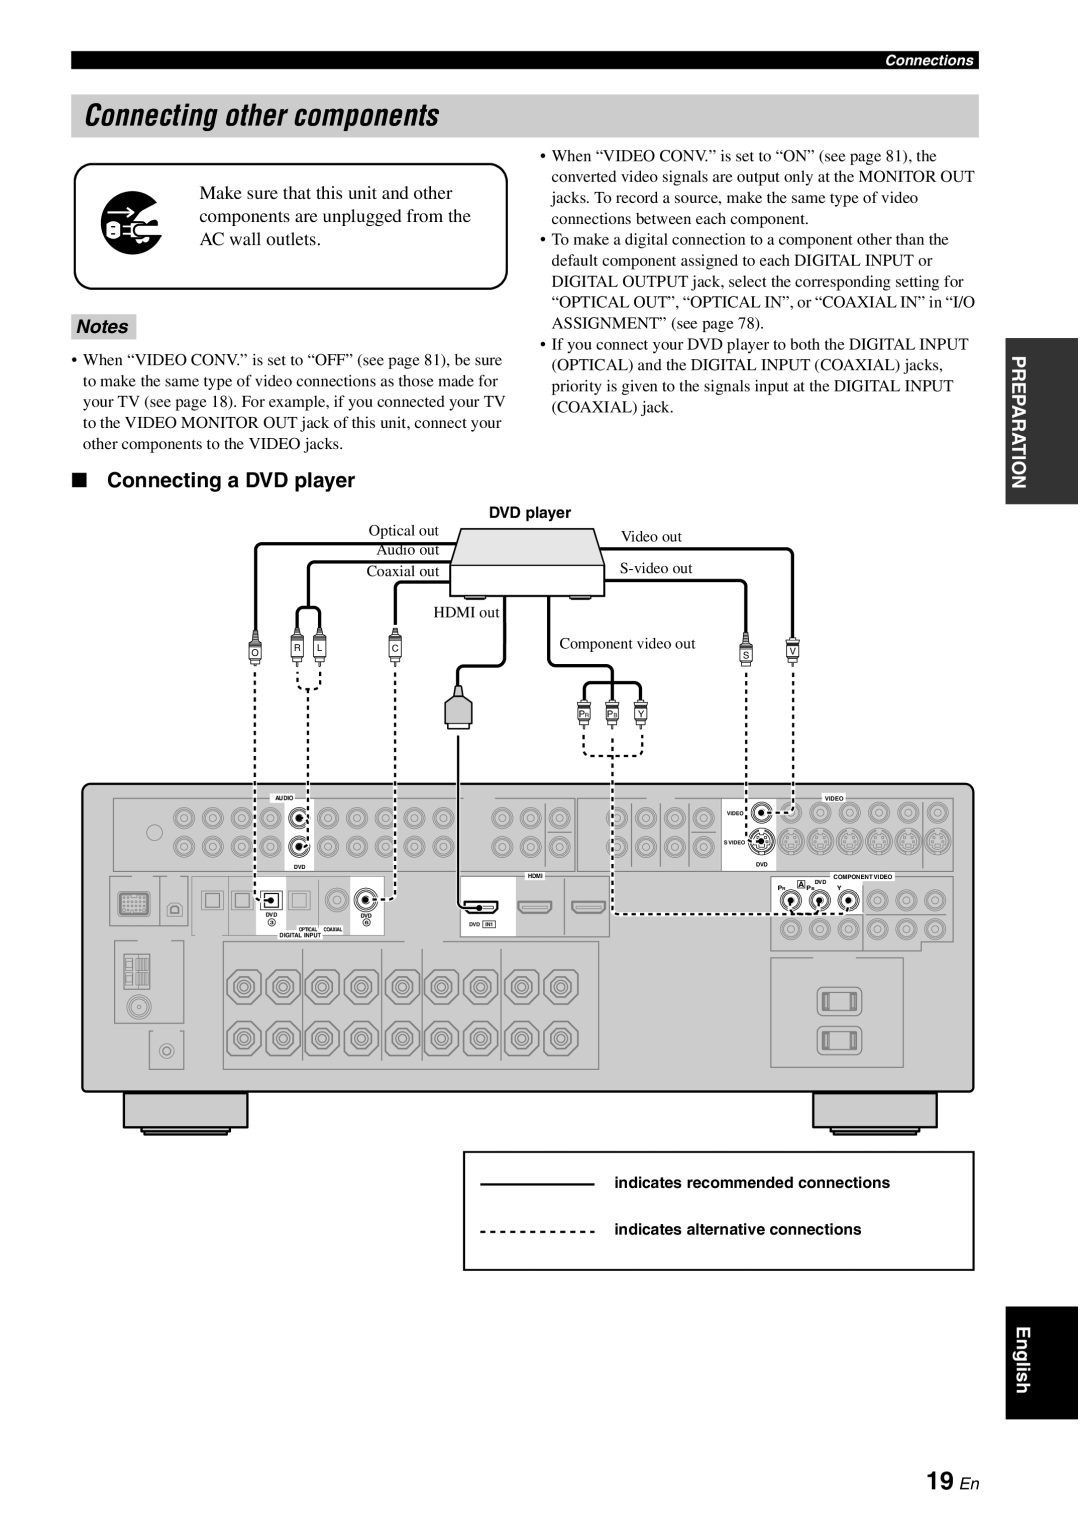 Yamaha HTR-6060 owner manual Connecting other components, 19 En, Connecting a DVD player, Notes 